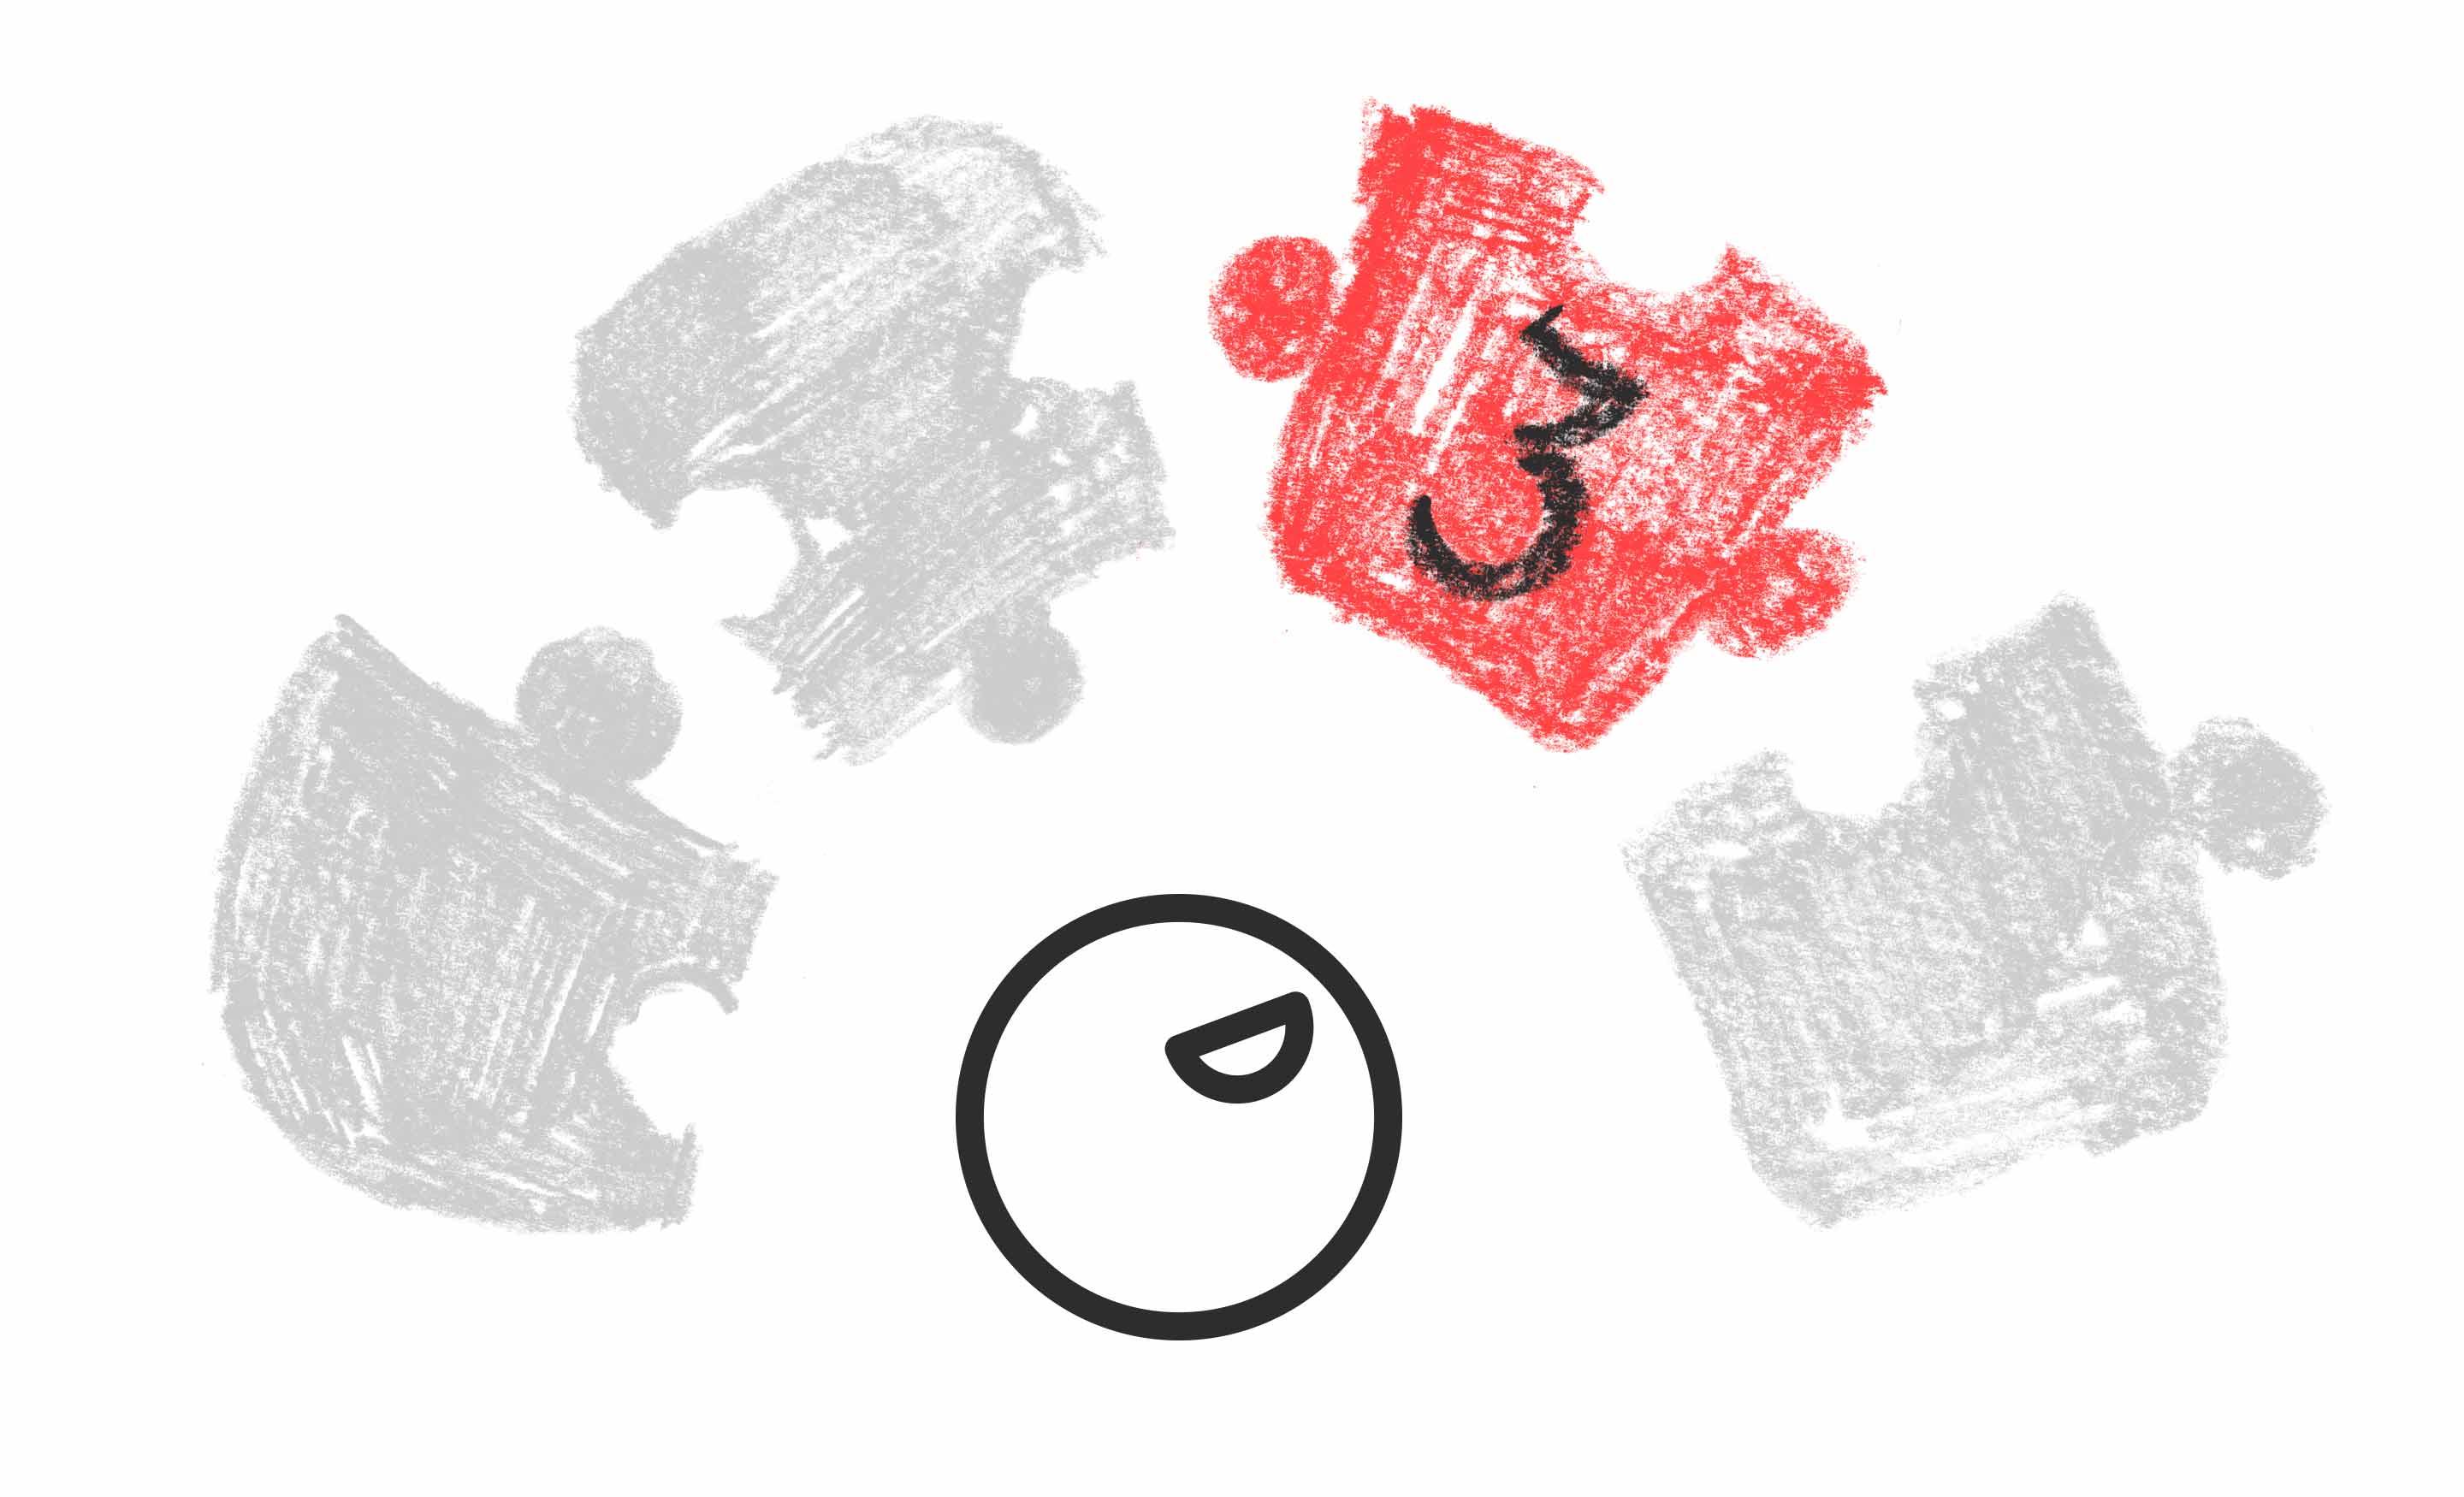 An happy face looks at a red puzzle piece with a "3" on it. Three other puzzle pieces are greyed out.